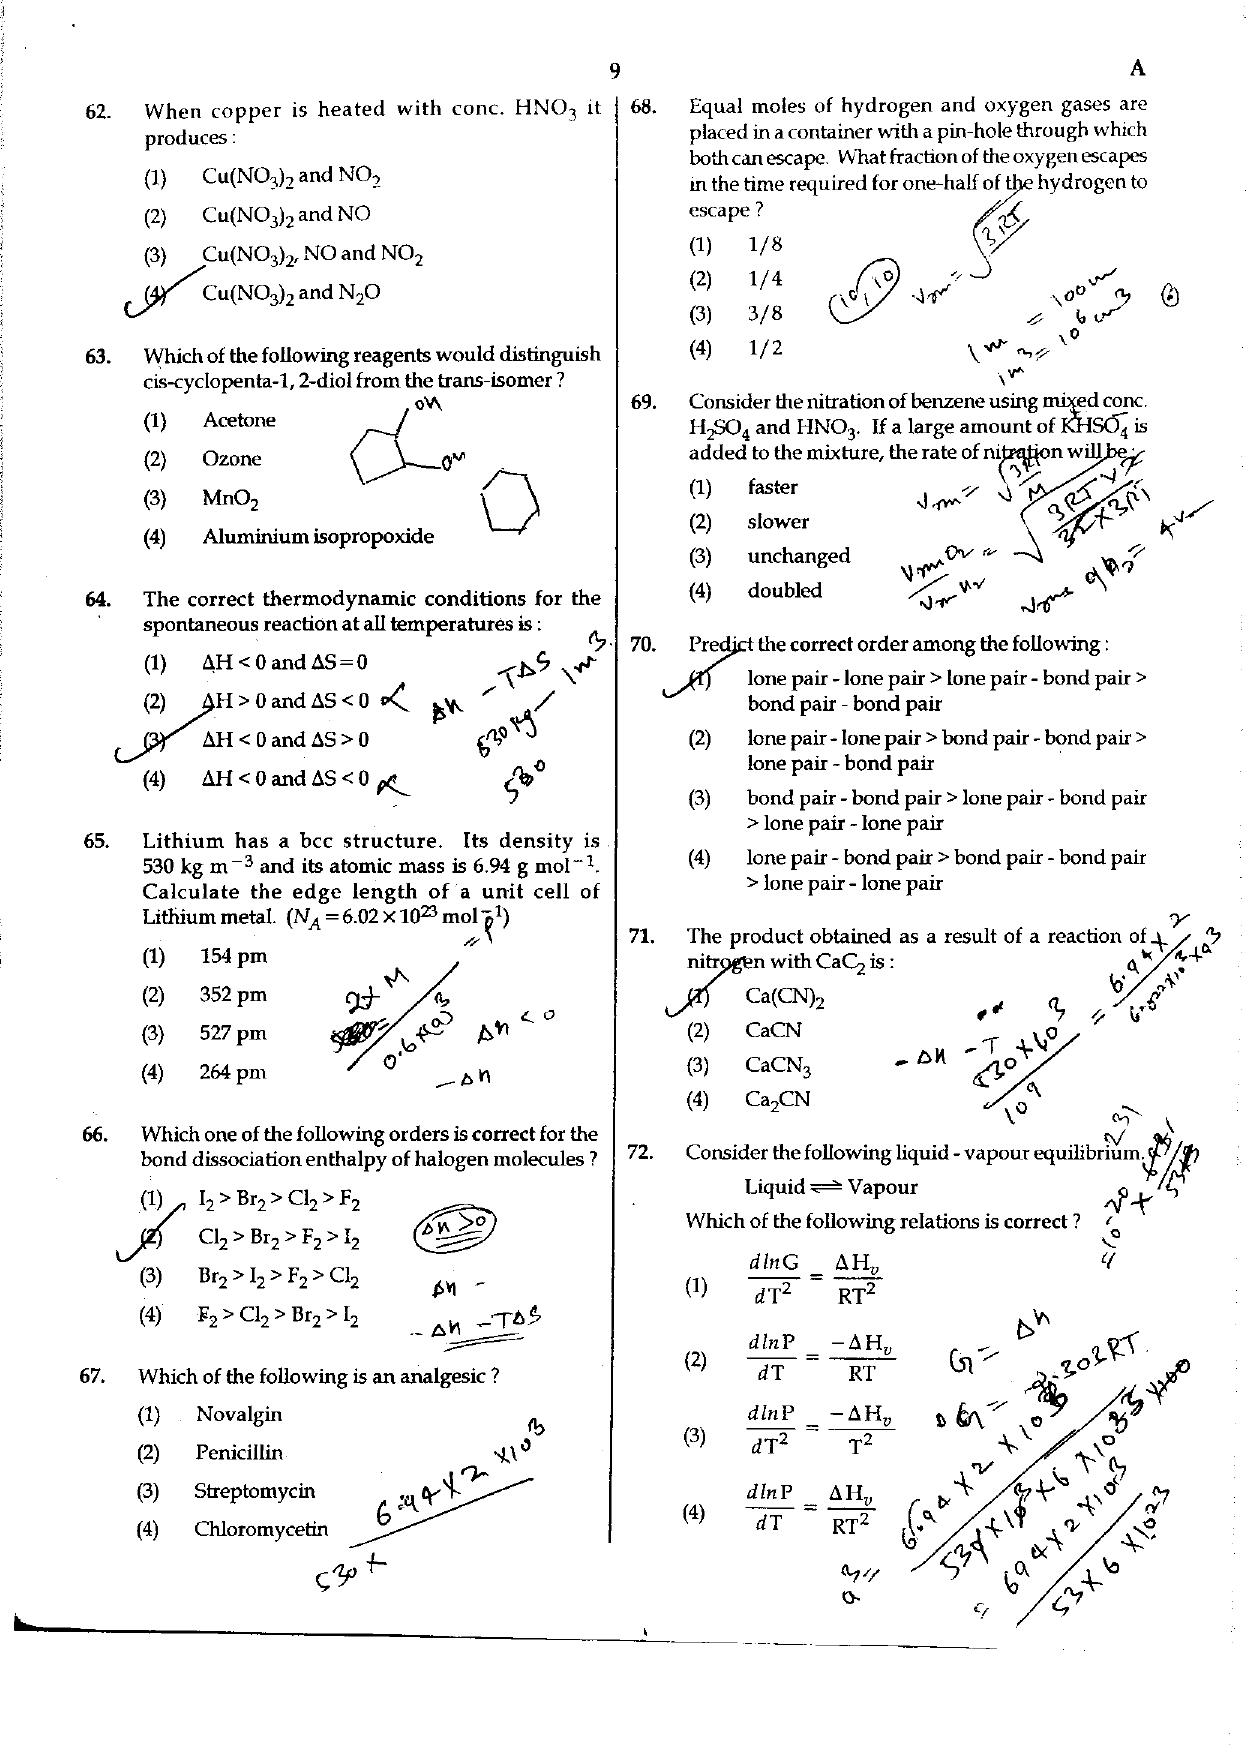 NEET Code A/ P/ W 2016 Question Paper - Page 9